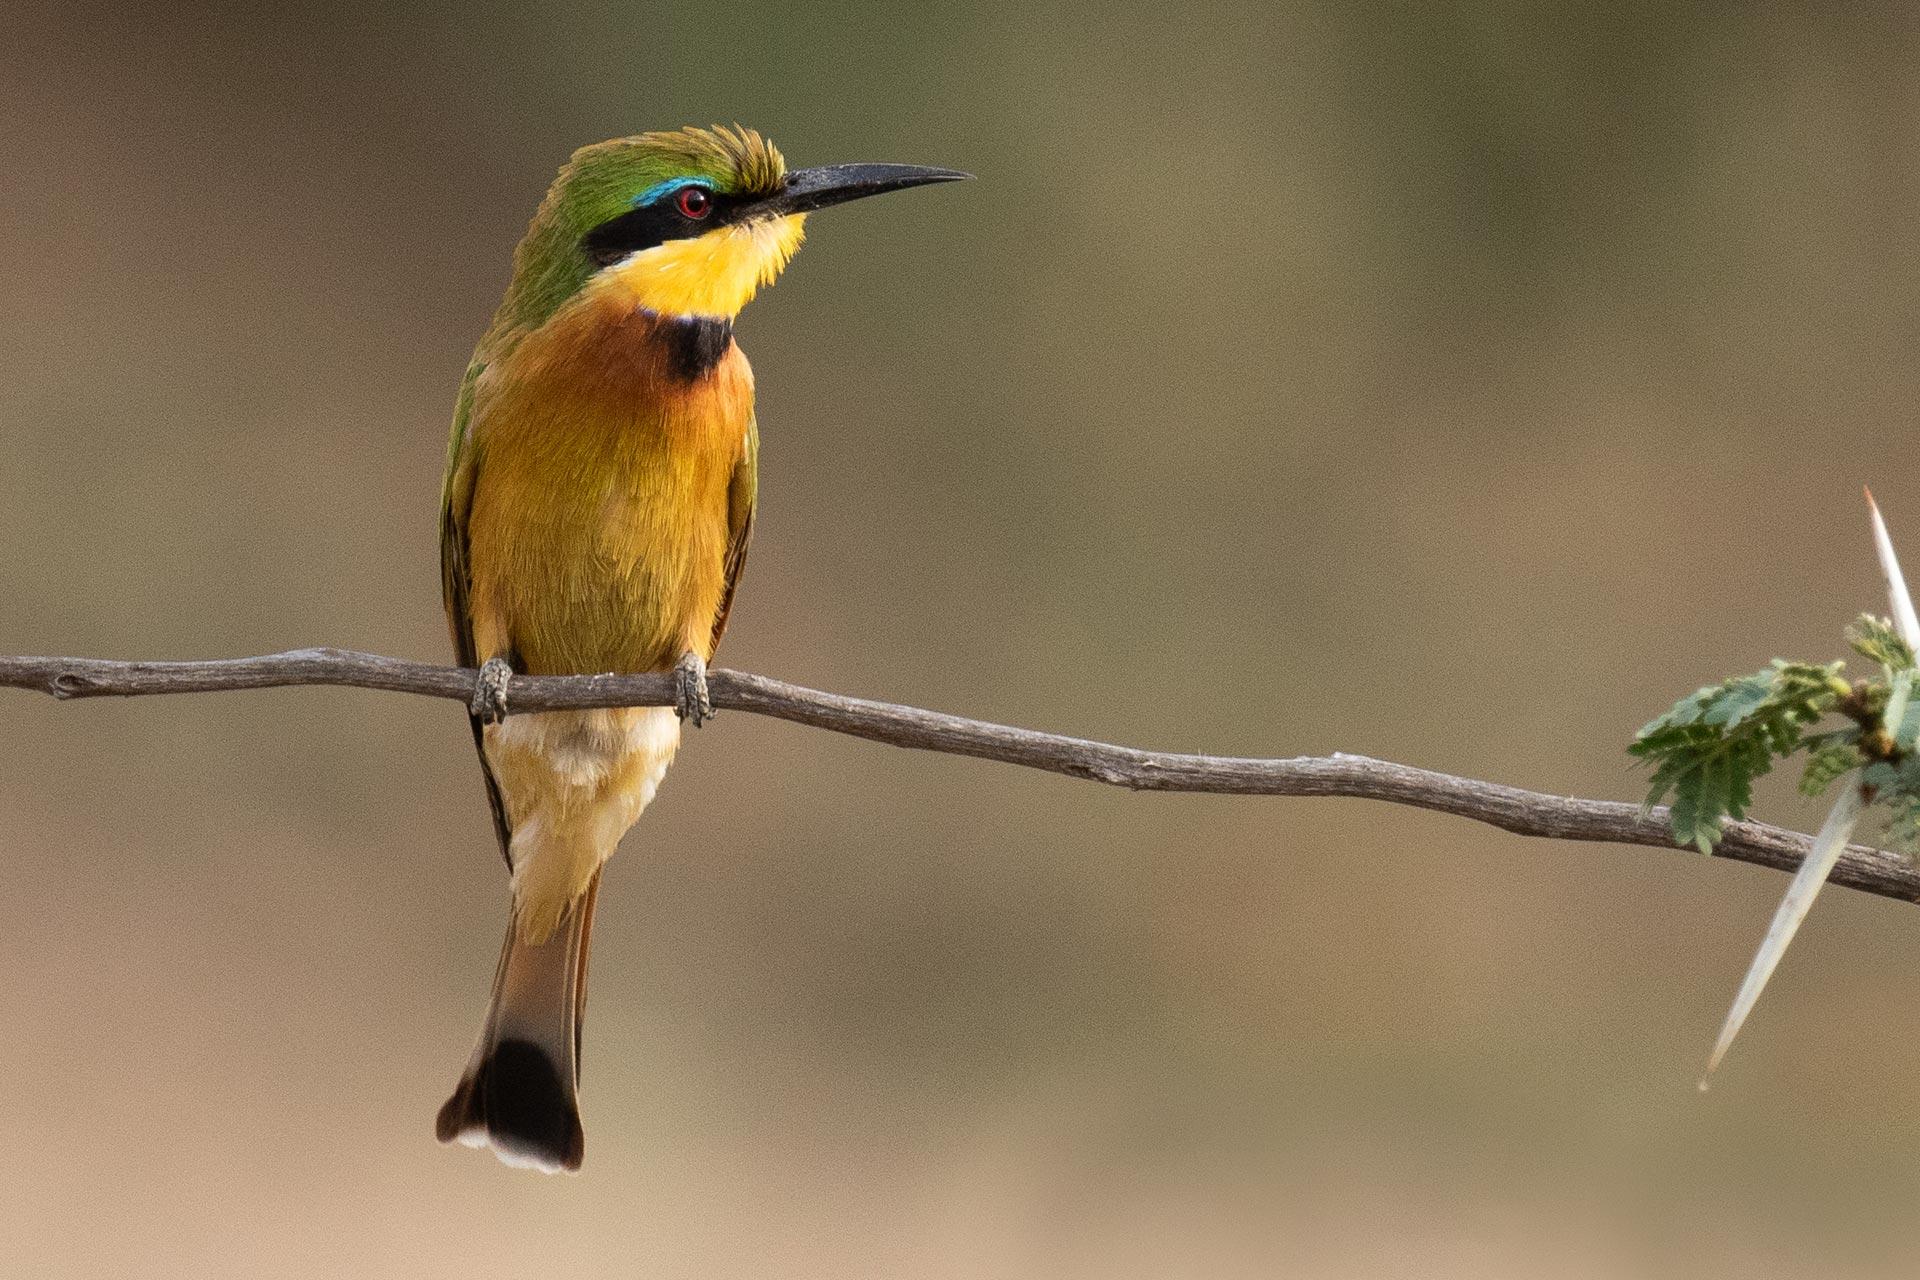 The blue-breasted bee-eater, Merops variegatus, exhibits several physically defining characteristics of the Meropidae. It has a relatively large head, short neck, bright plumage, long curved slim sharp beak and a broad black eyestripe